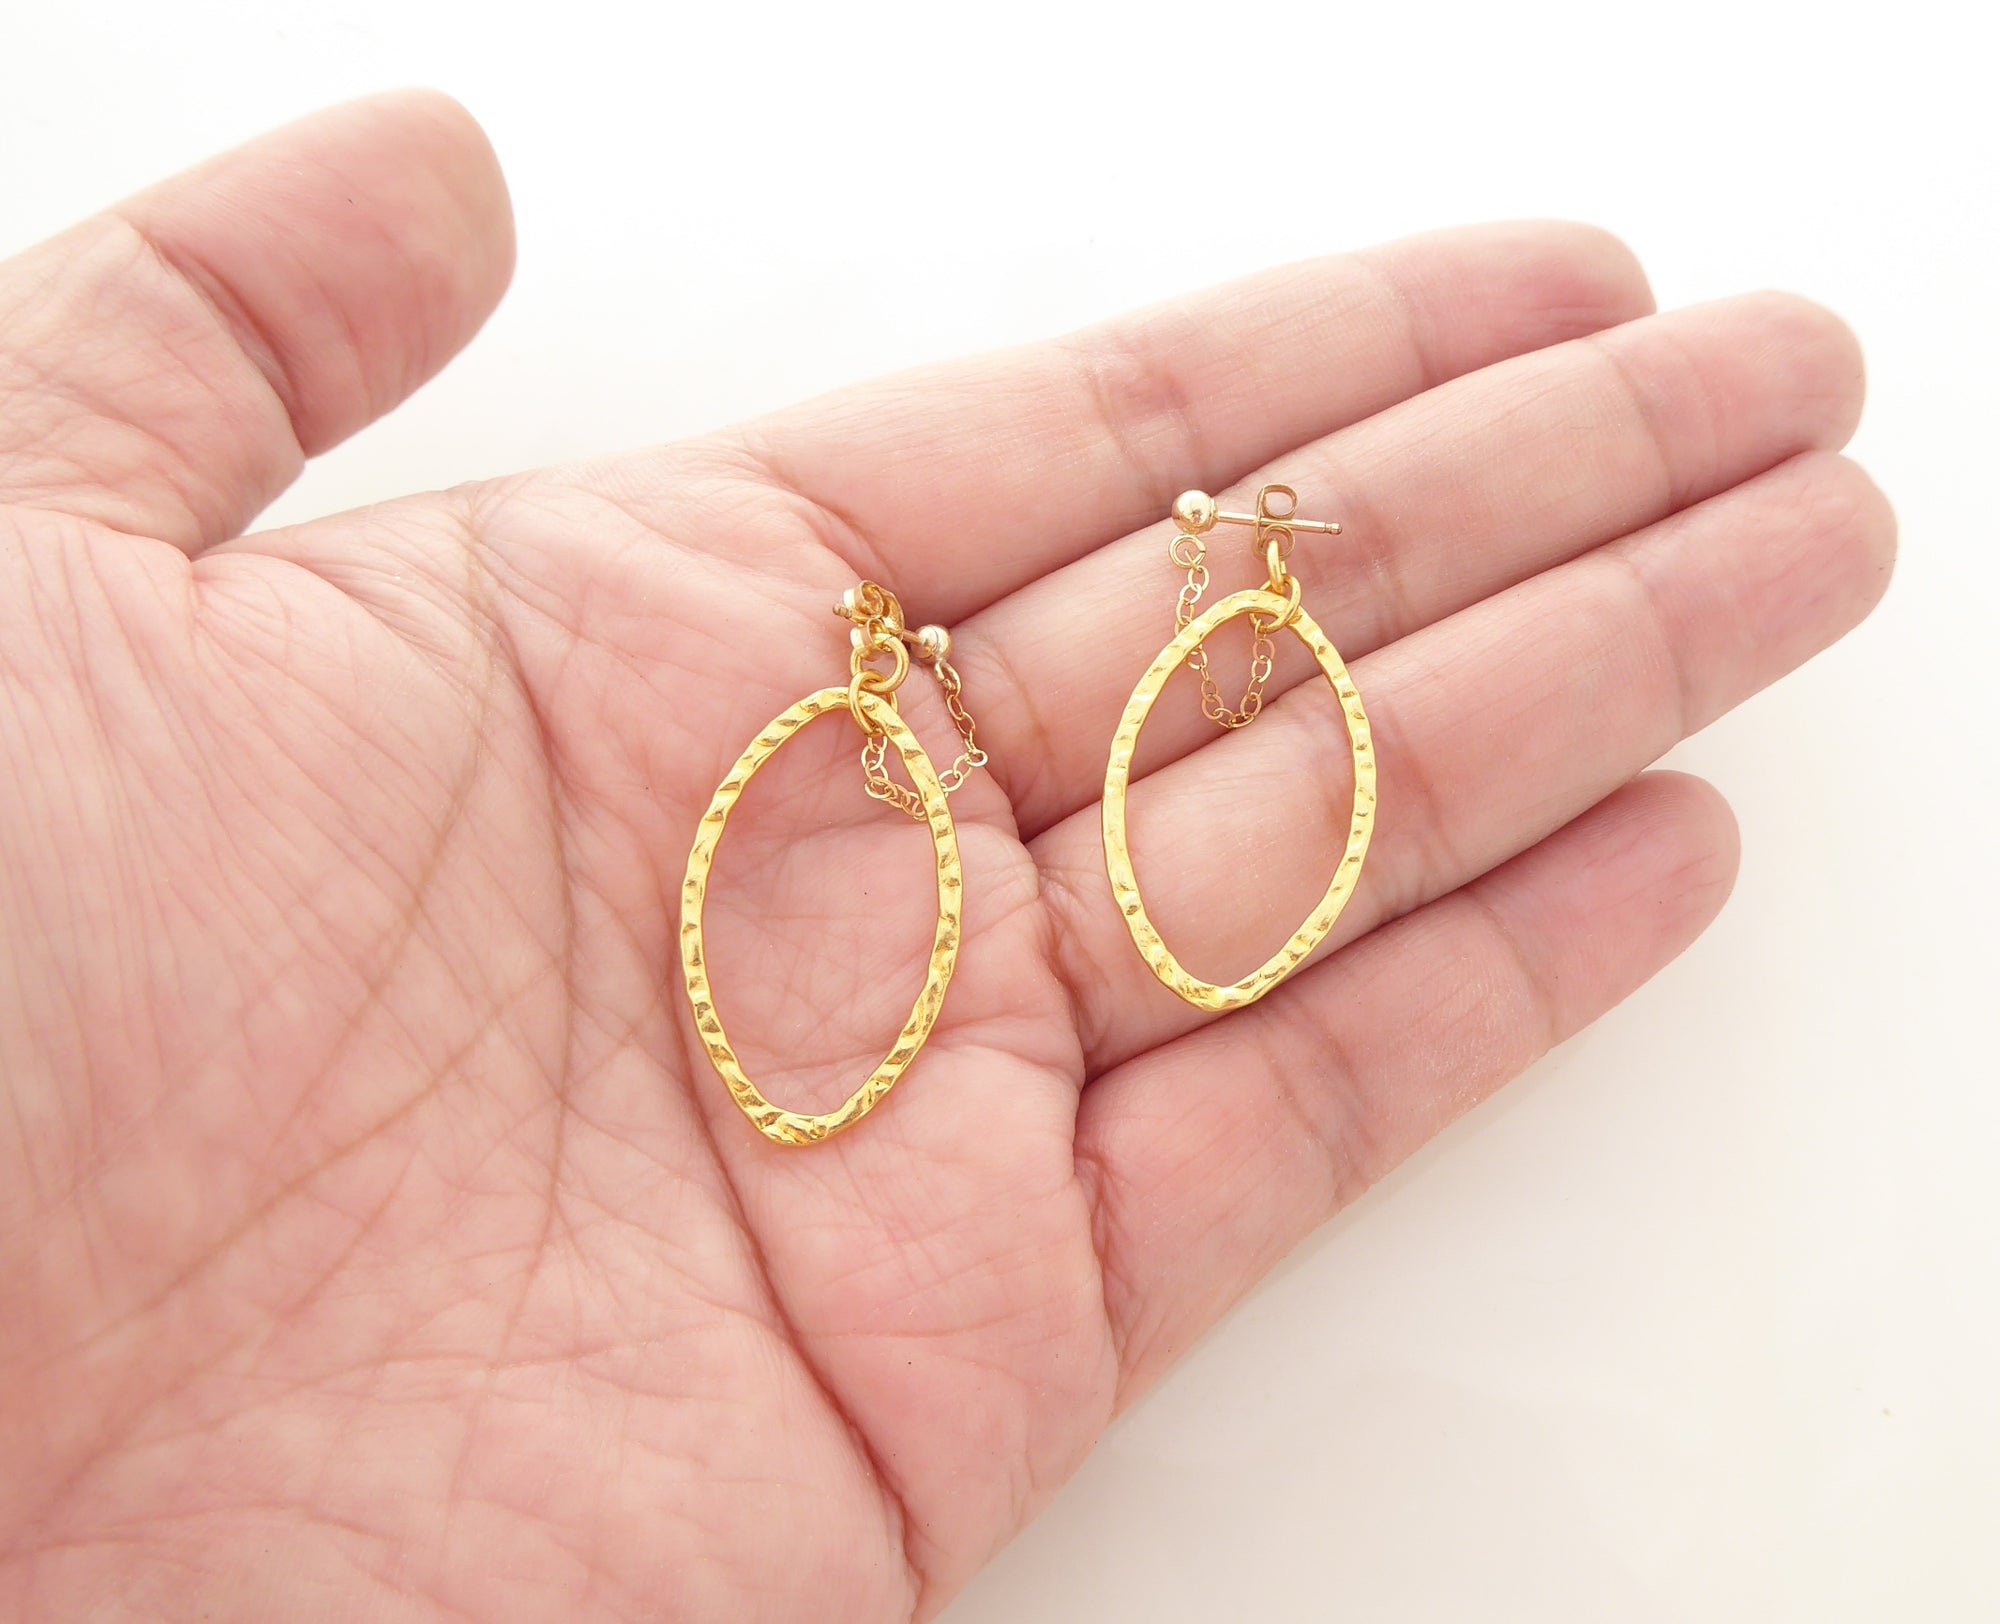 Gold saturn earrings in hammered